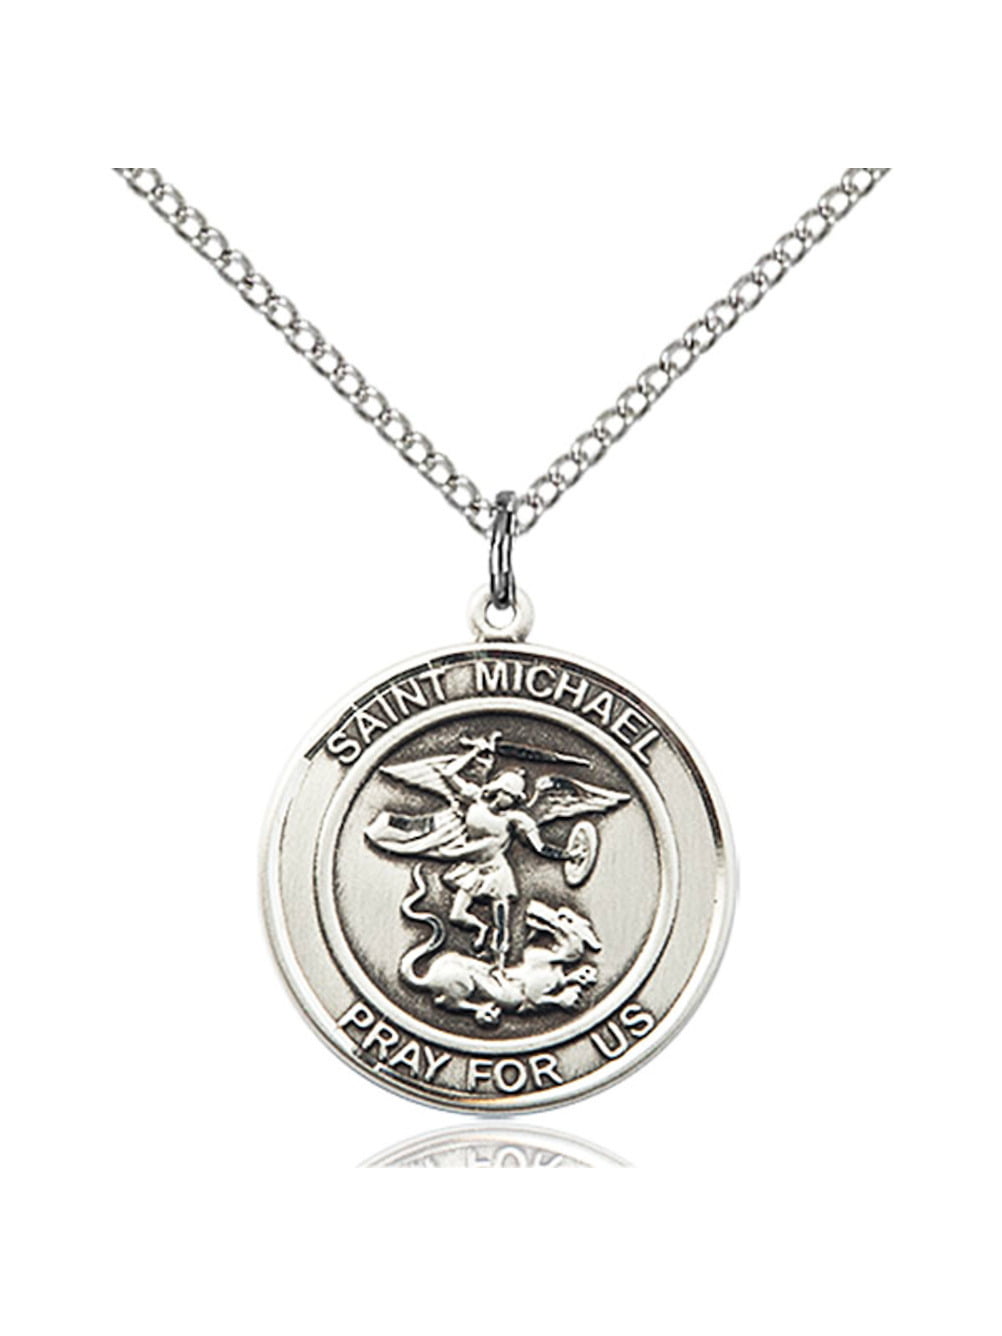 Bonyak Jewelry Sterling Silver St Michael the Archangel Pendant 3/4 X 1/2 inches with 18 inch Sterling Silver Curb Chain